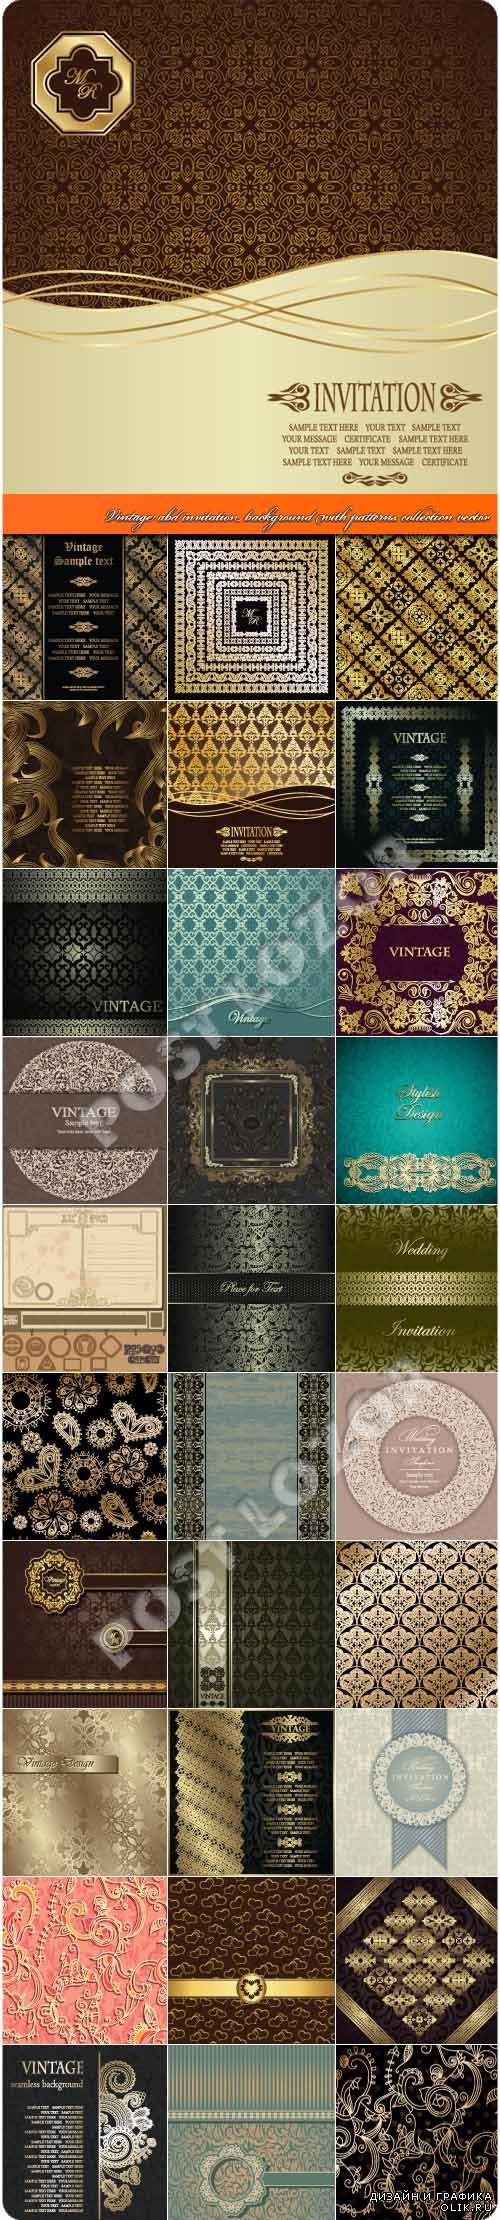 Vintage and invitation background with patterns collection vector